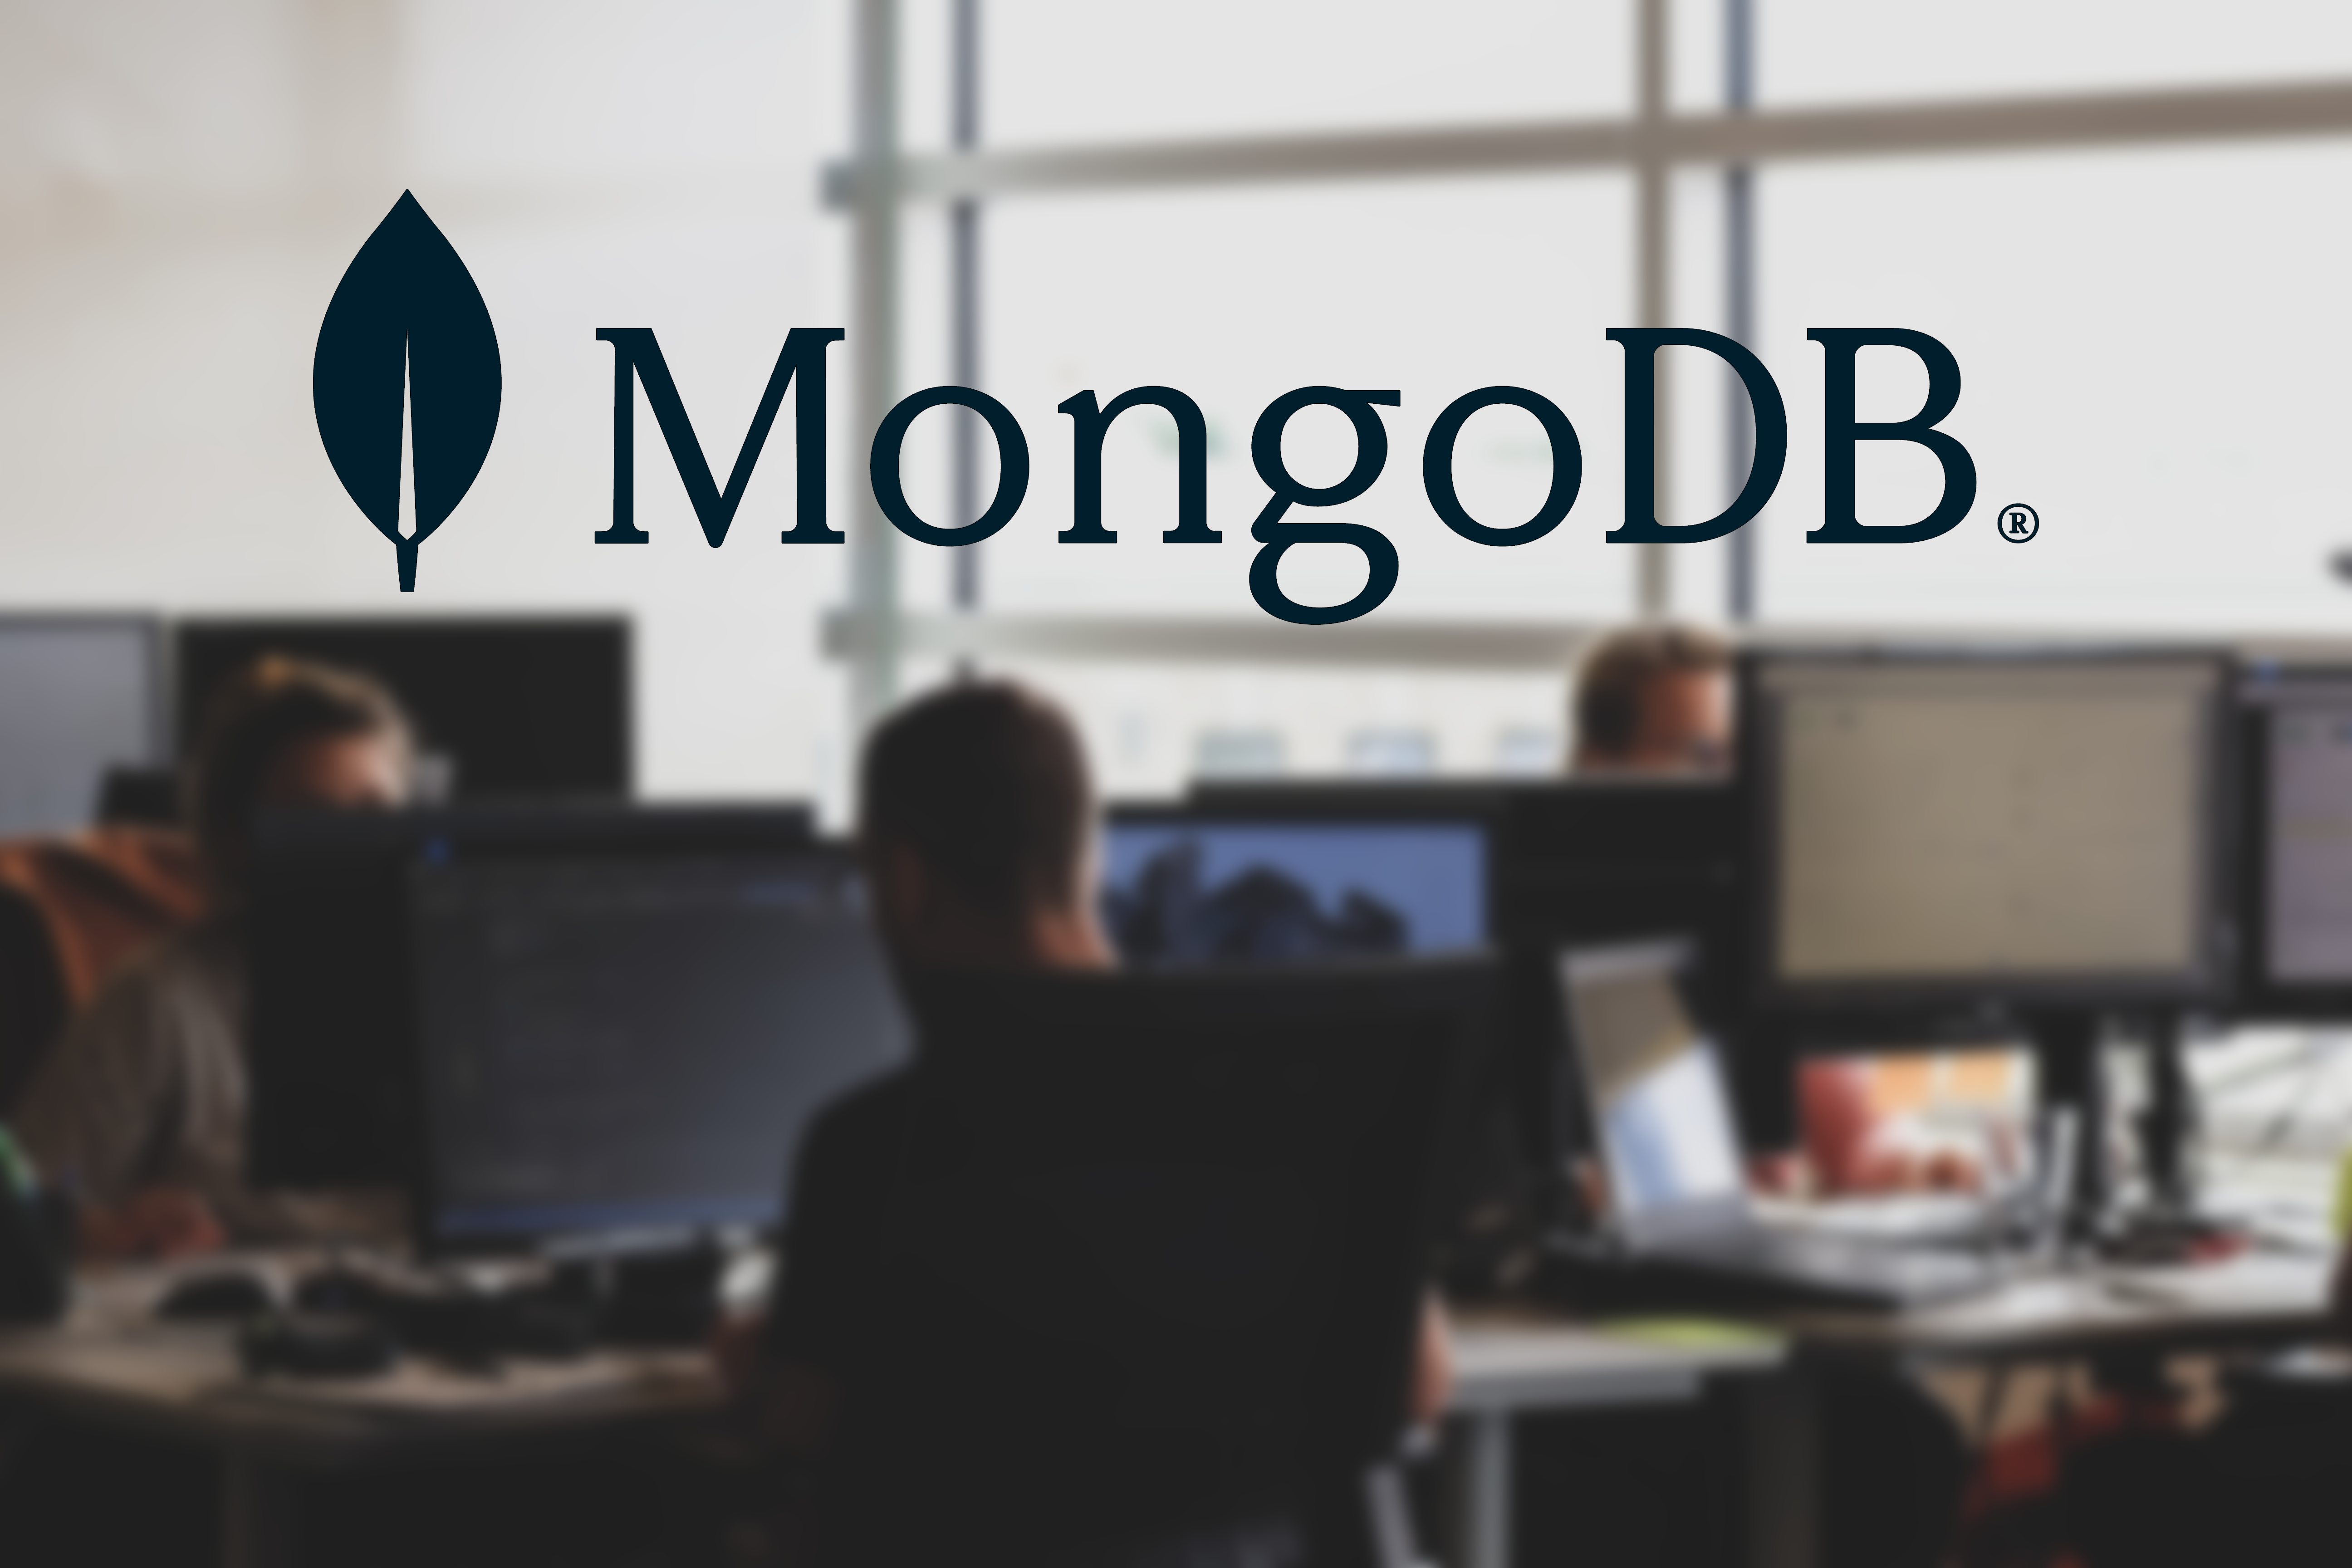 Developers working on computers with MongoDB logo in the foreground